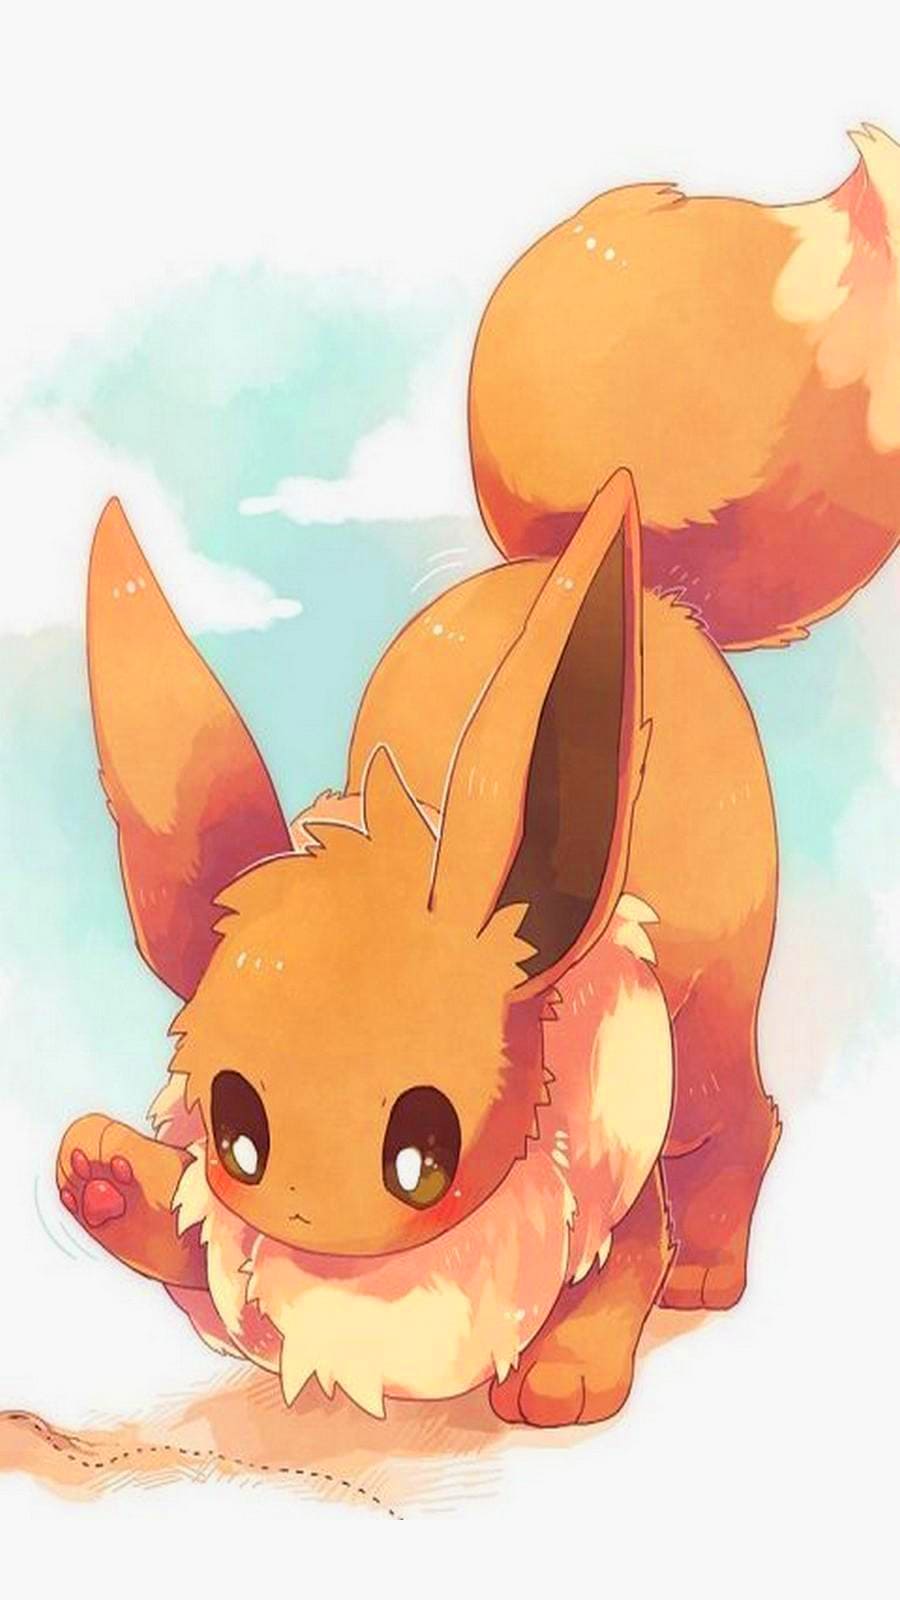 Eevee iPhone Wallpaper with high-resolution 1080x1920 pixel. You can use this wallpaper for your iPhone 5, 6, 7, 8, X, XS, XR backgrounds, Mobile Screensaver, or iPad Lock Screen - Pokemon